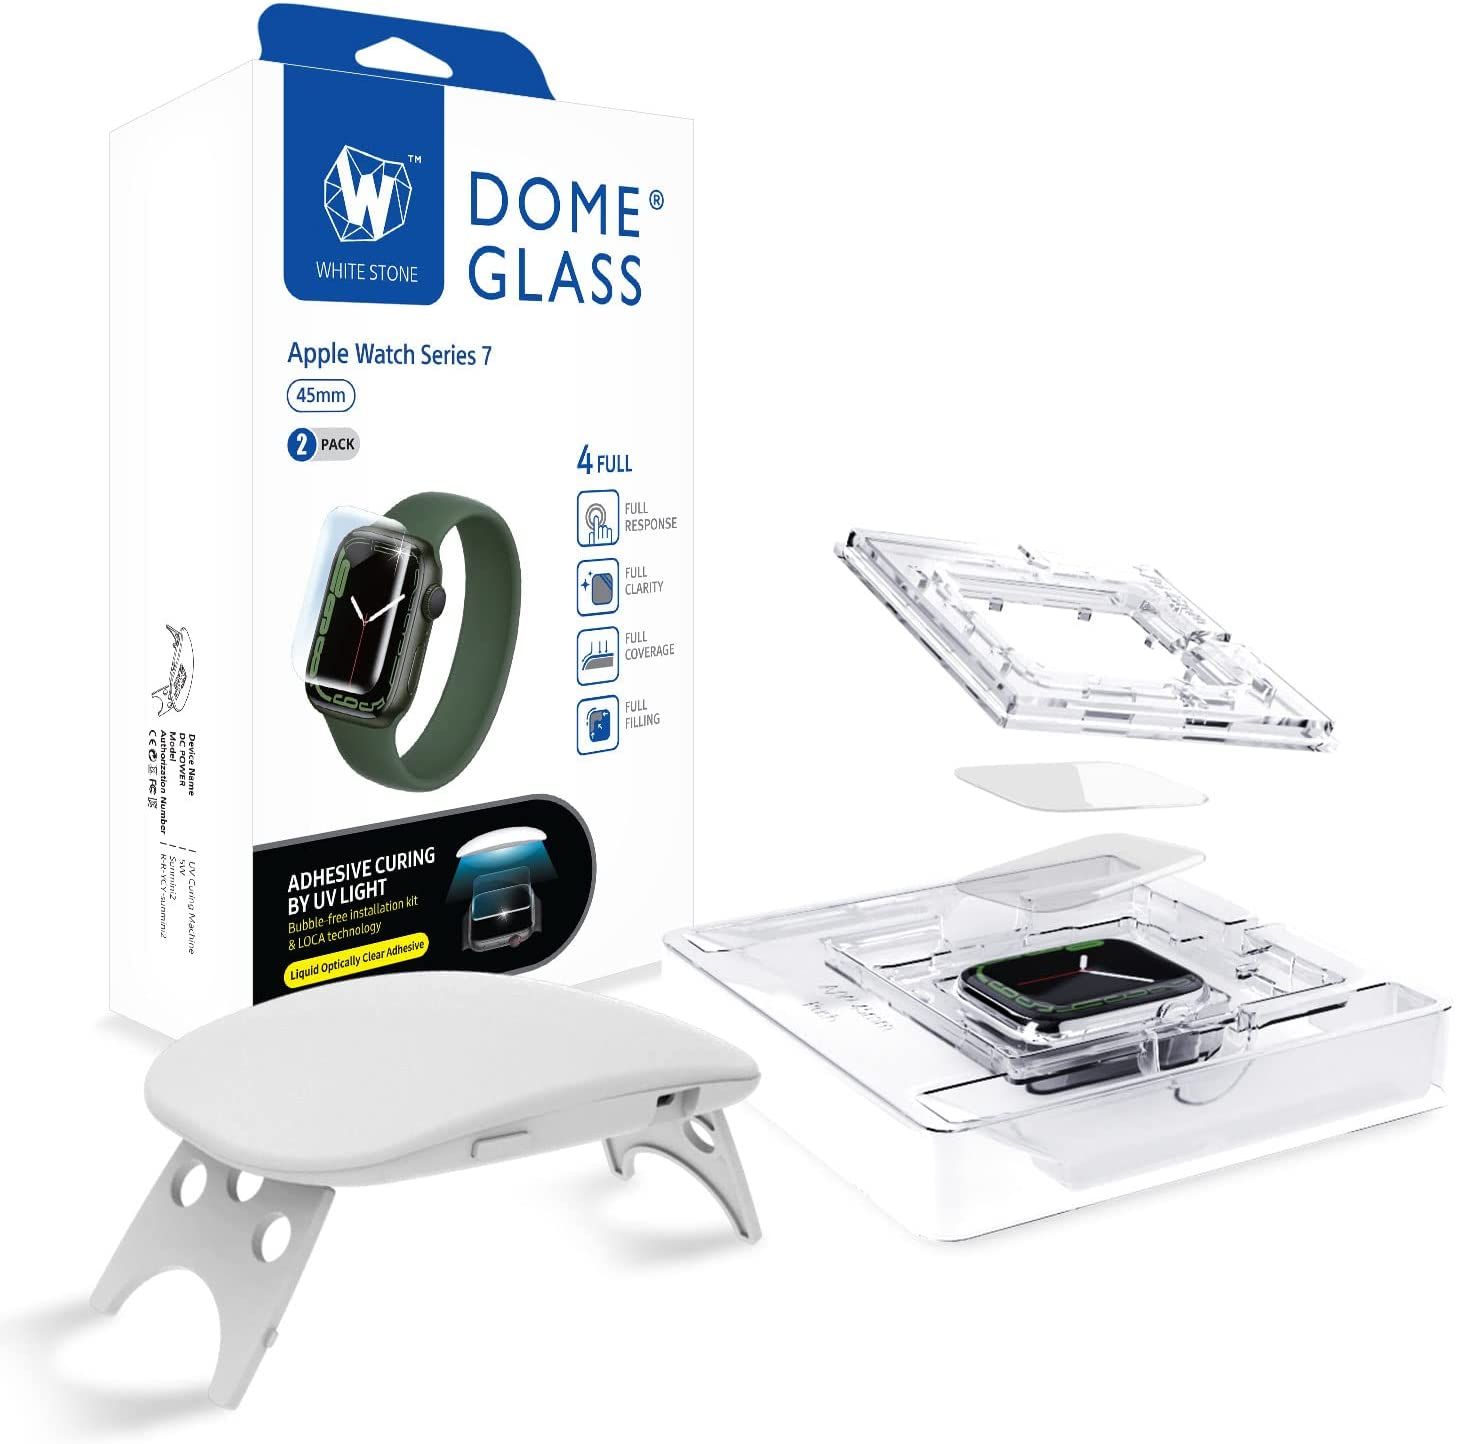 whitestone dome glass for apple watch series 7 1